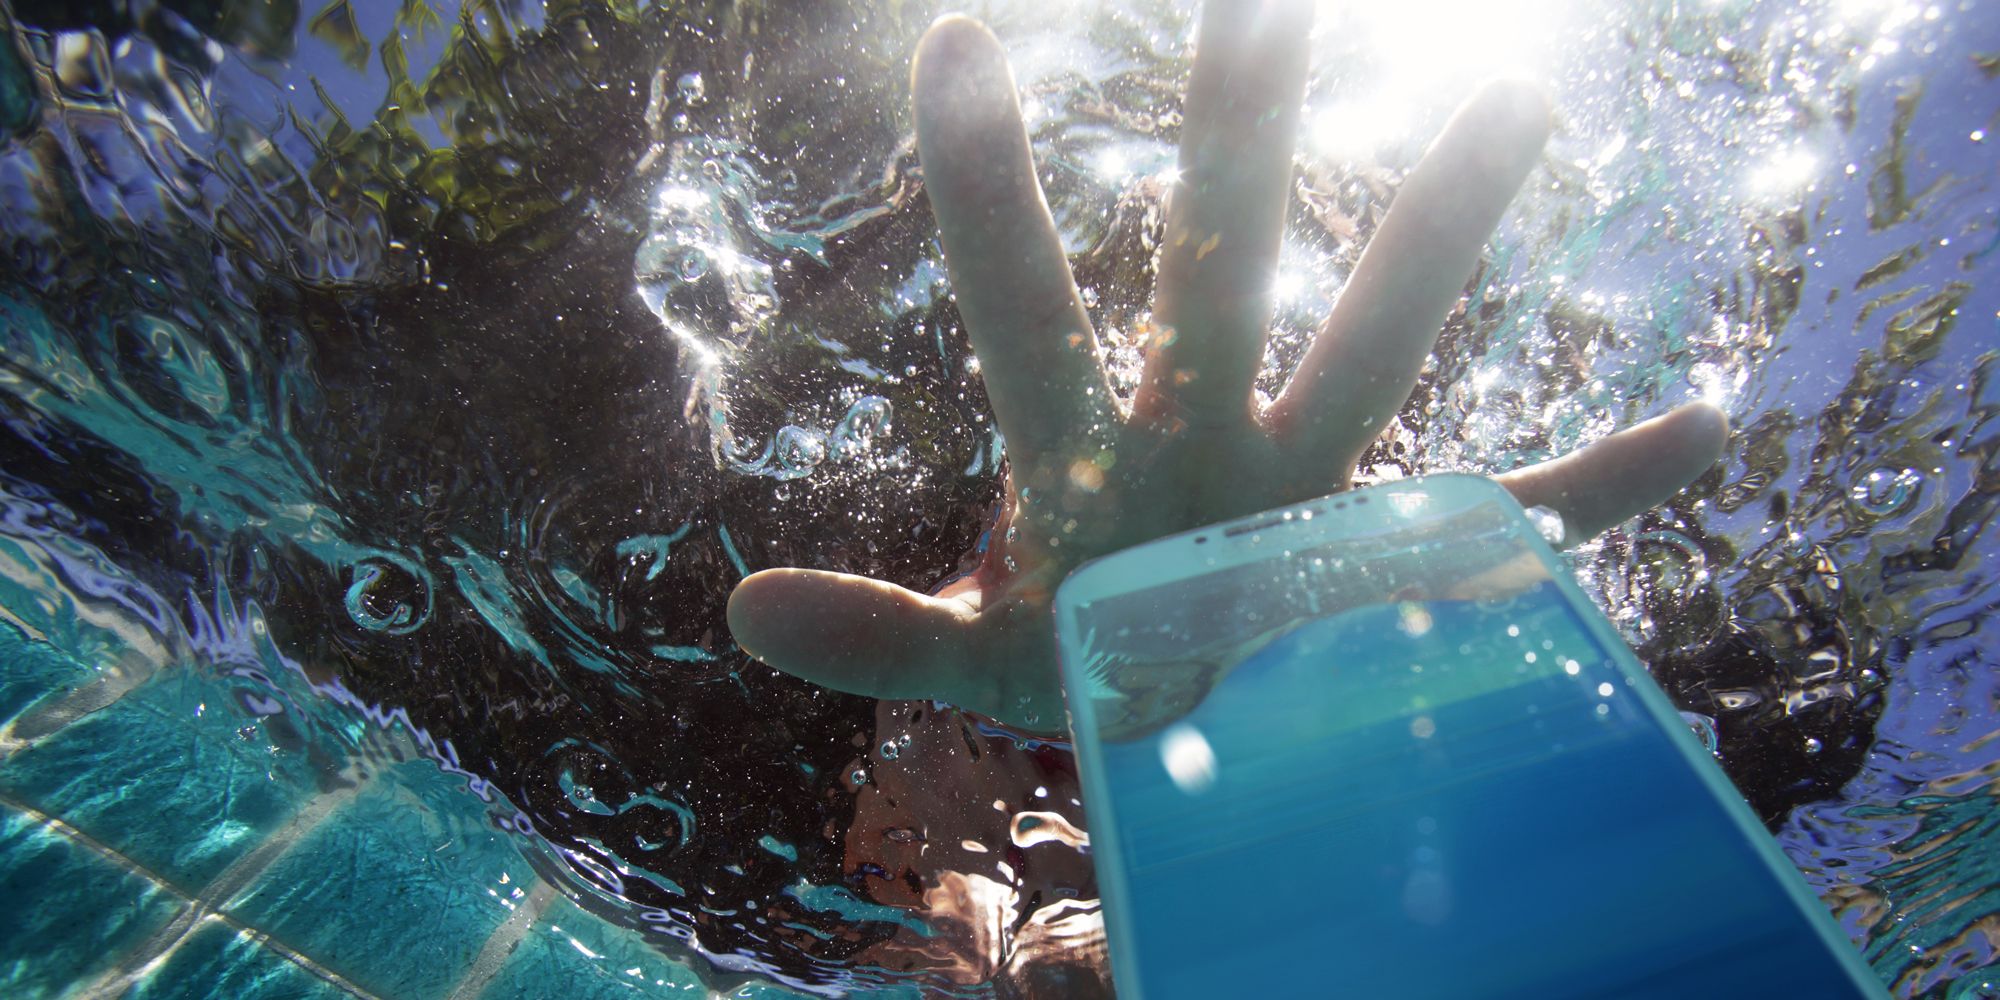 hand reaching for phone dropped in pool